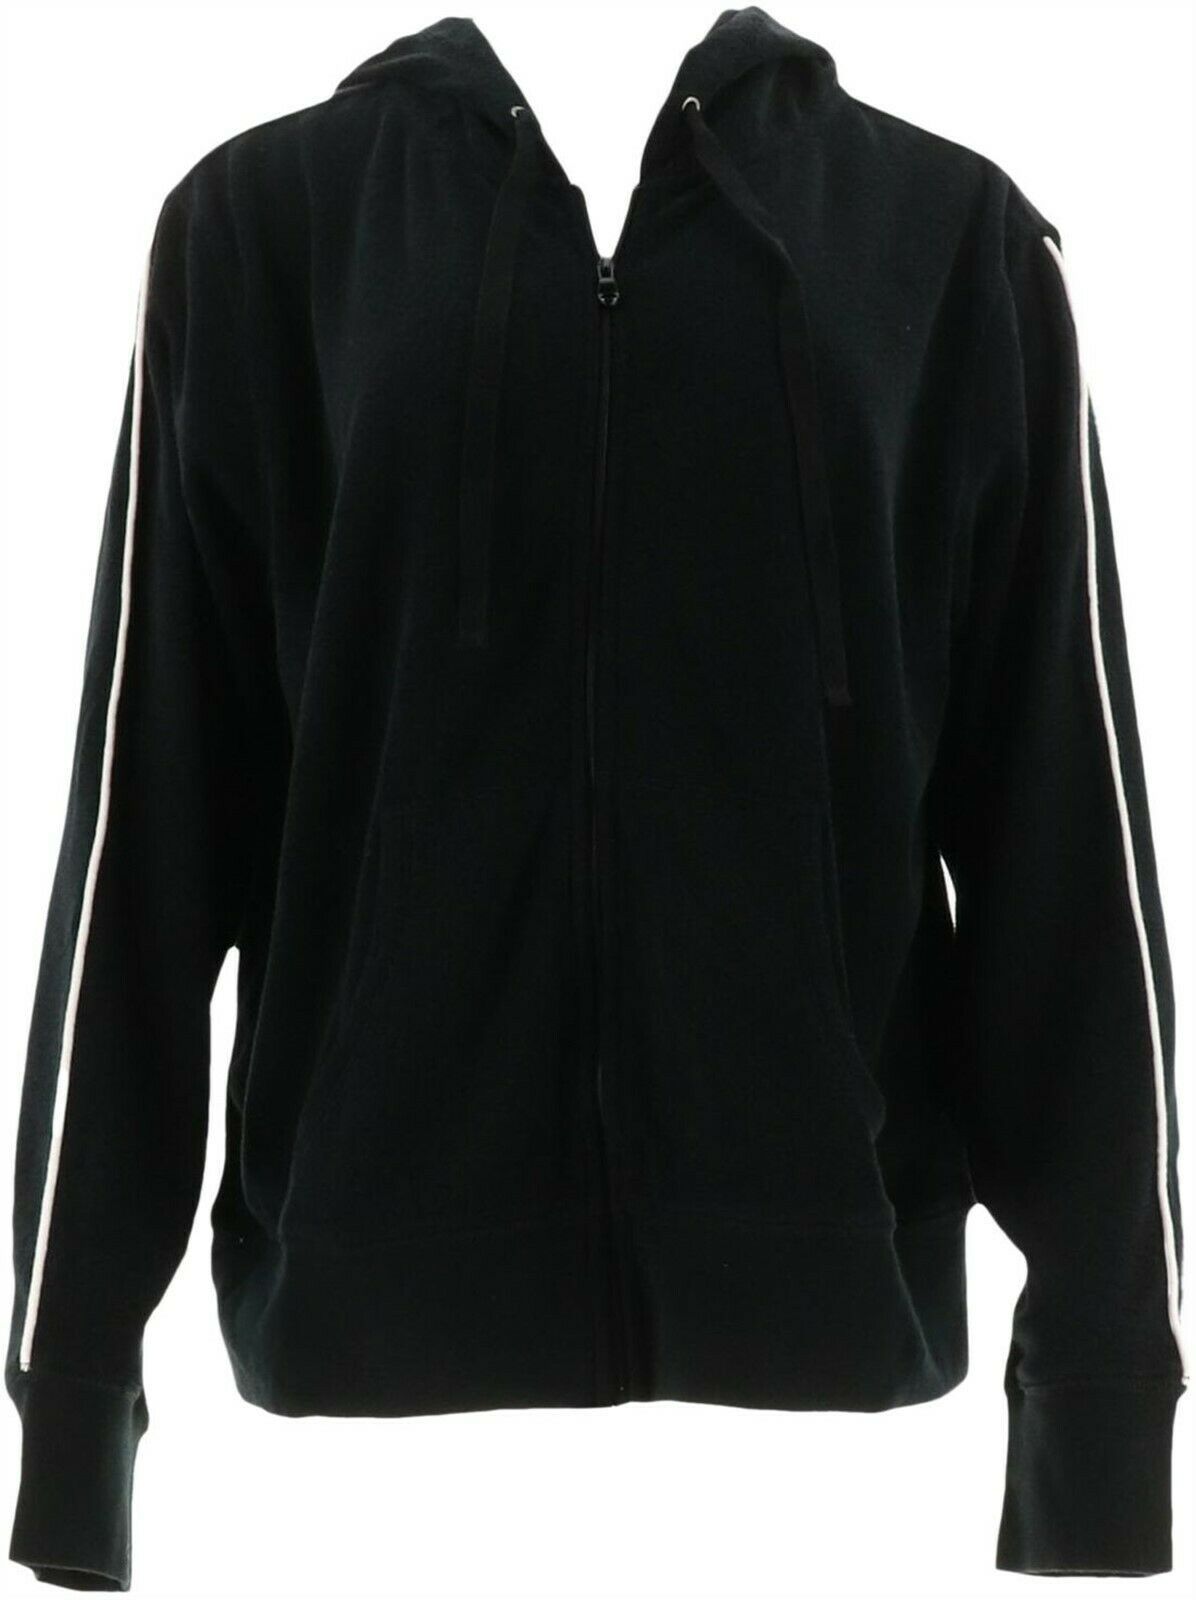 Tracey Anderson GILI Baby Terry Zip Front Hoodie Noir Black S NEW A309747